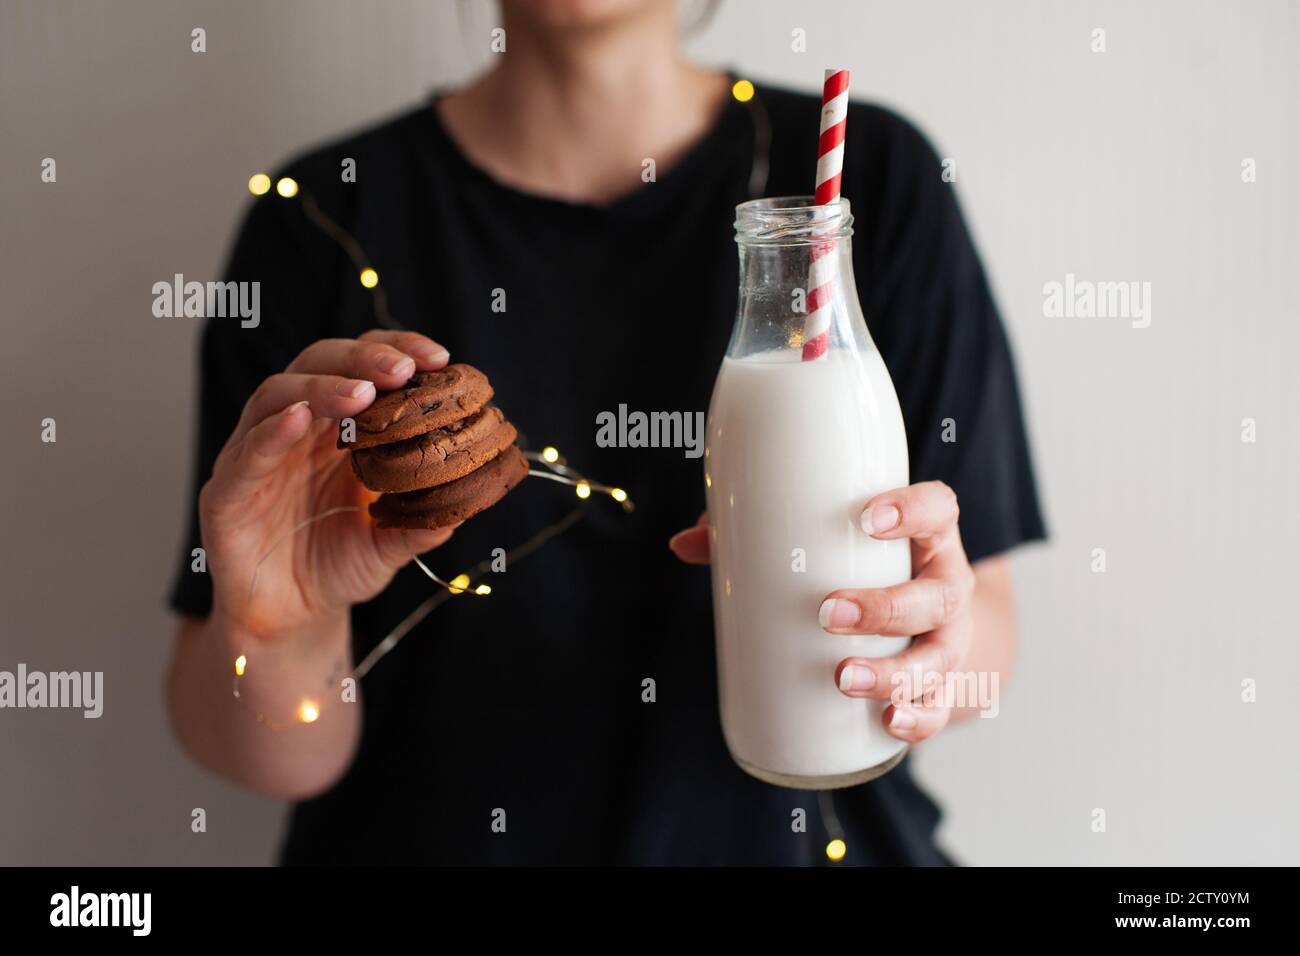 Woman holding tasty cookies and bottle of fresh milk over glowing lights close up. Winter holiday season. Good morning. Stock Photo